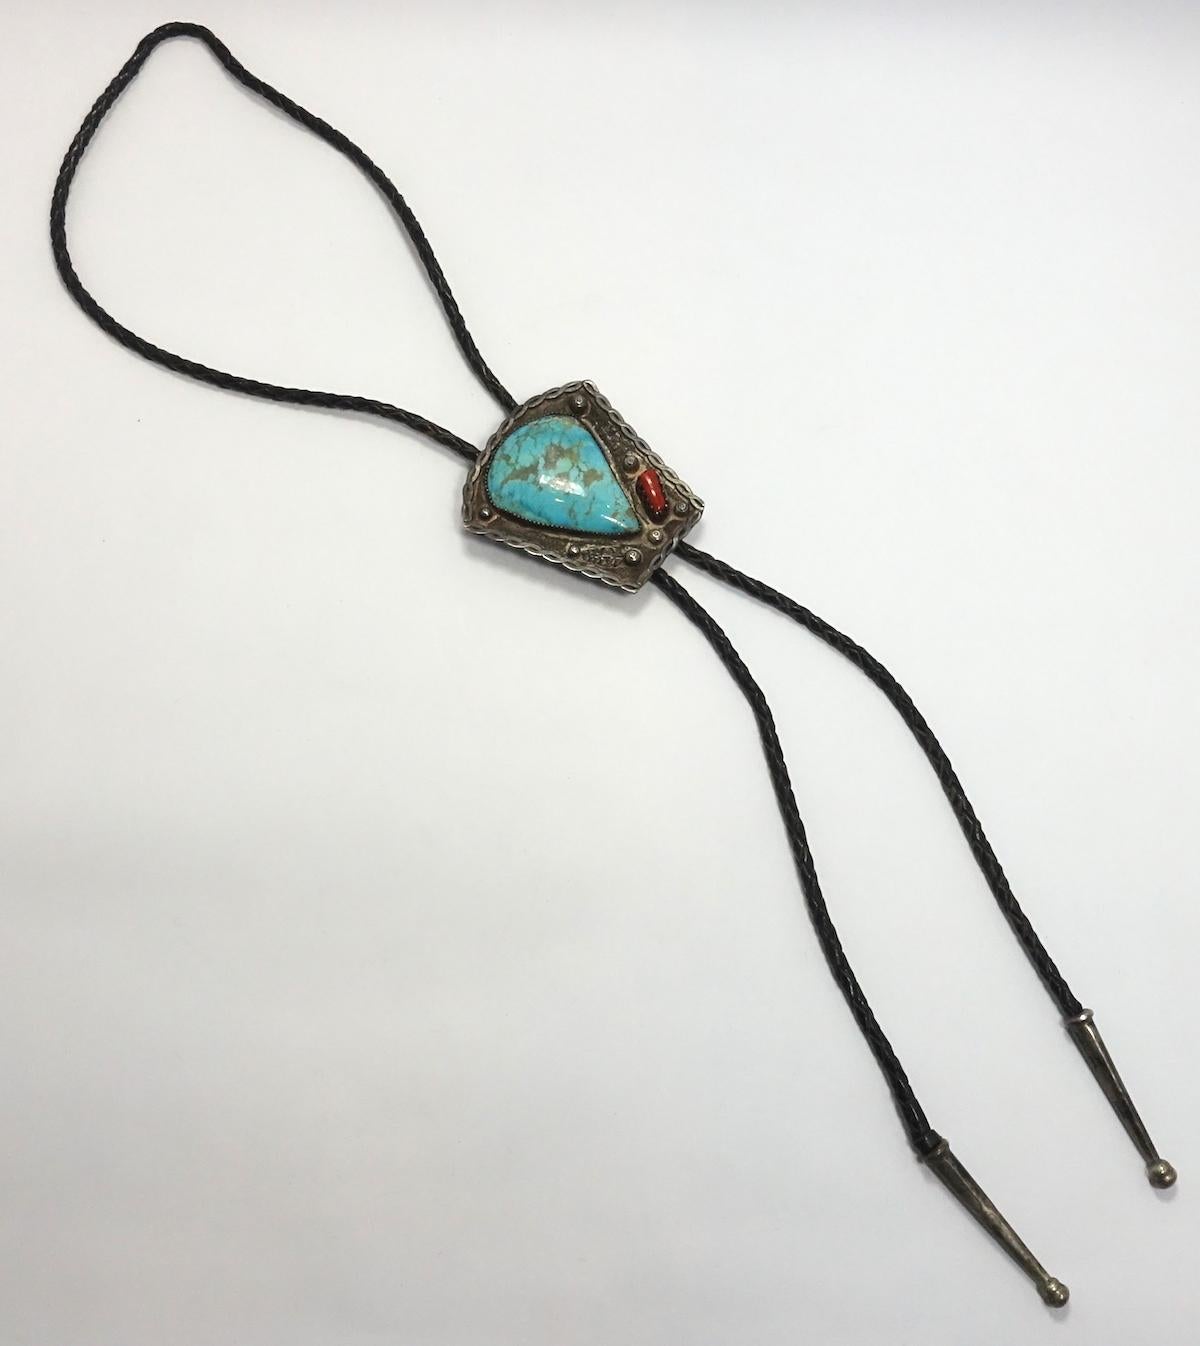 This vintage Pawn Navajo American Indian bola features a large turquoise stone centerpiece with a coral stone accent in sterling silver with black leather neckpiece.  In excellent condition, the centerpiece measures 2-1/2” x 2-1/4” and the leather